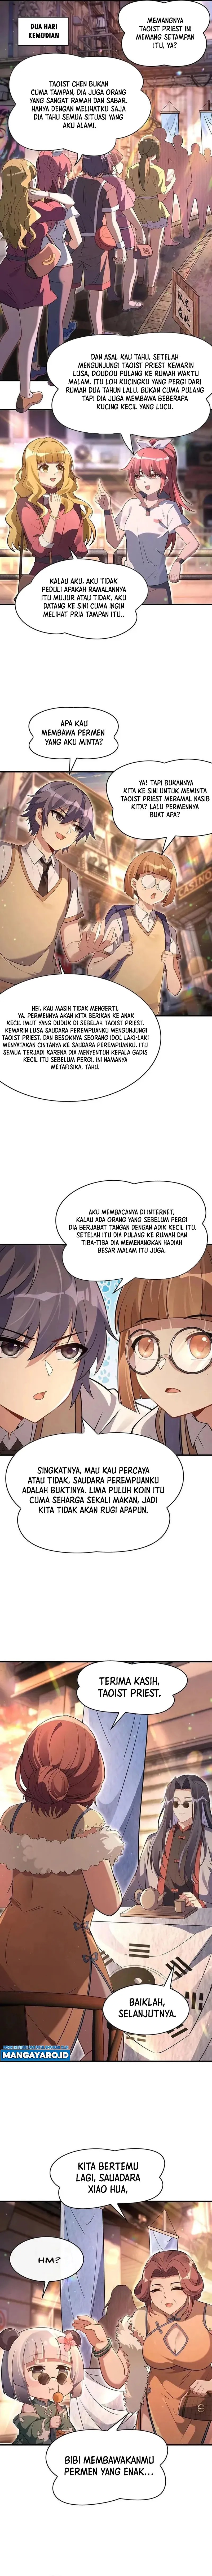 Dilarang COPAS - situs resmi www.mangacanblog.com - Komik my female apprentices are all big shots from the future 269 - chapter 269 270 Indonesia my female apprentices are all big shots from the future 269 - chapter 269 Terbaru 3|Baca Manga Komik Indonesia|Mangacan